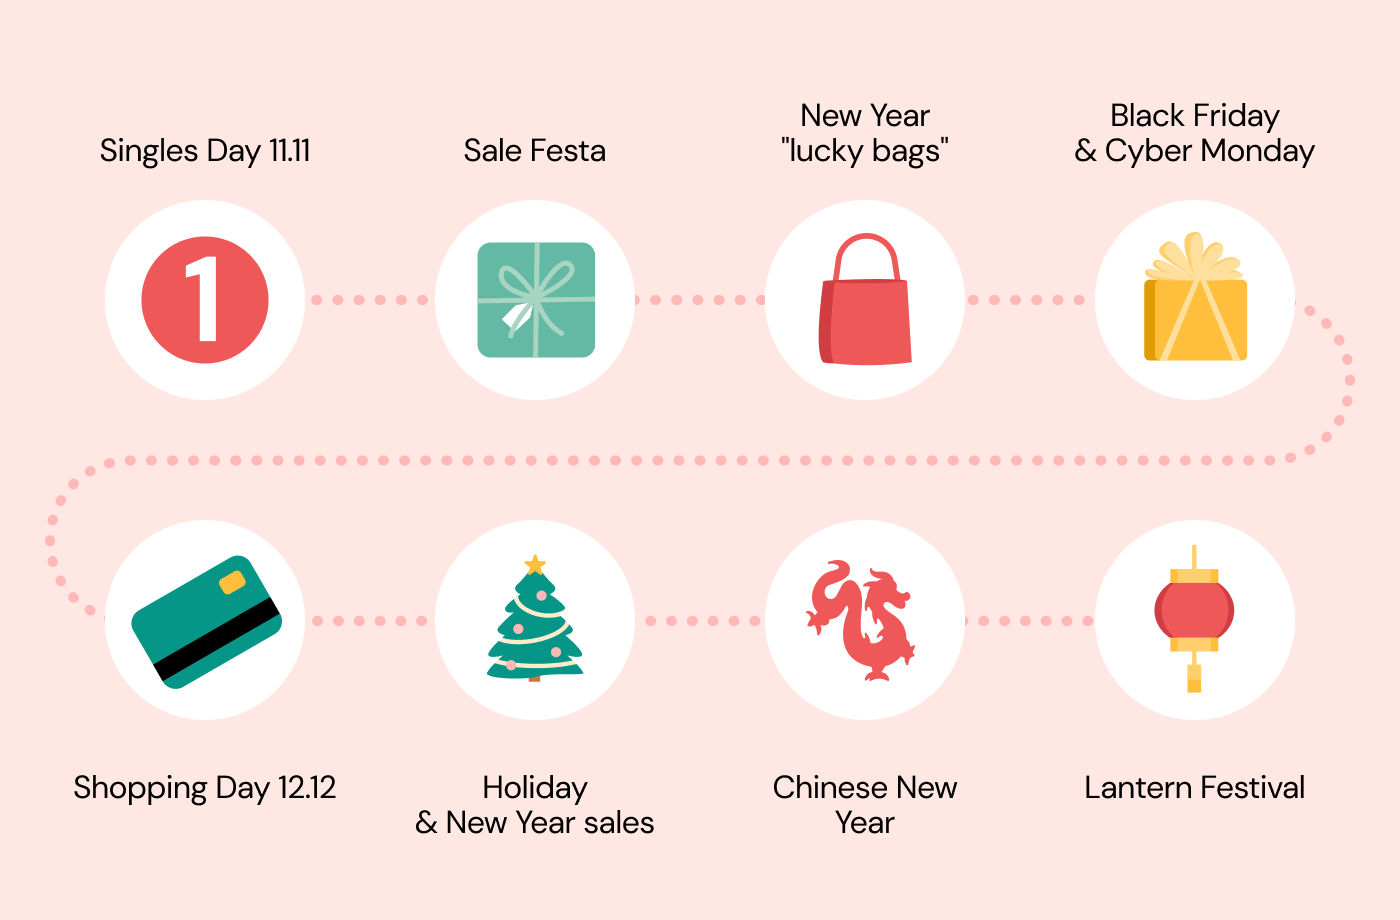 Timeline of shopping season events